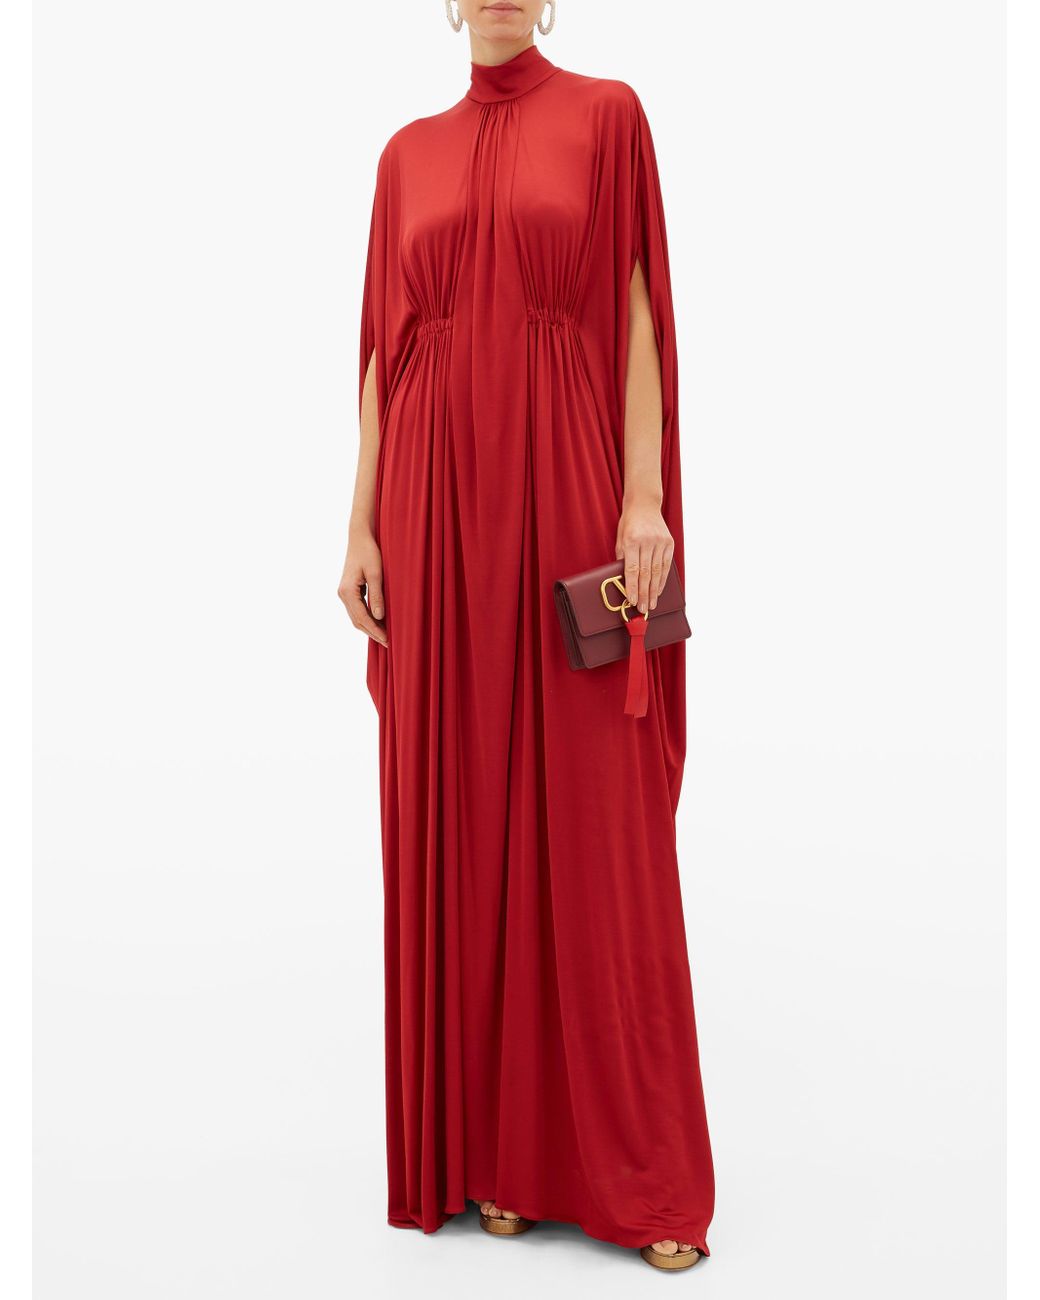 Valentino Cape Draped Satin Gown in Red | Lyst